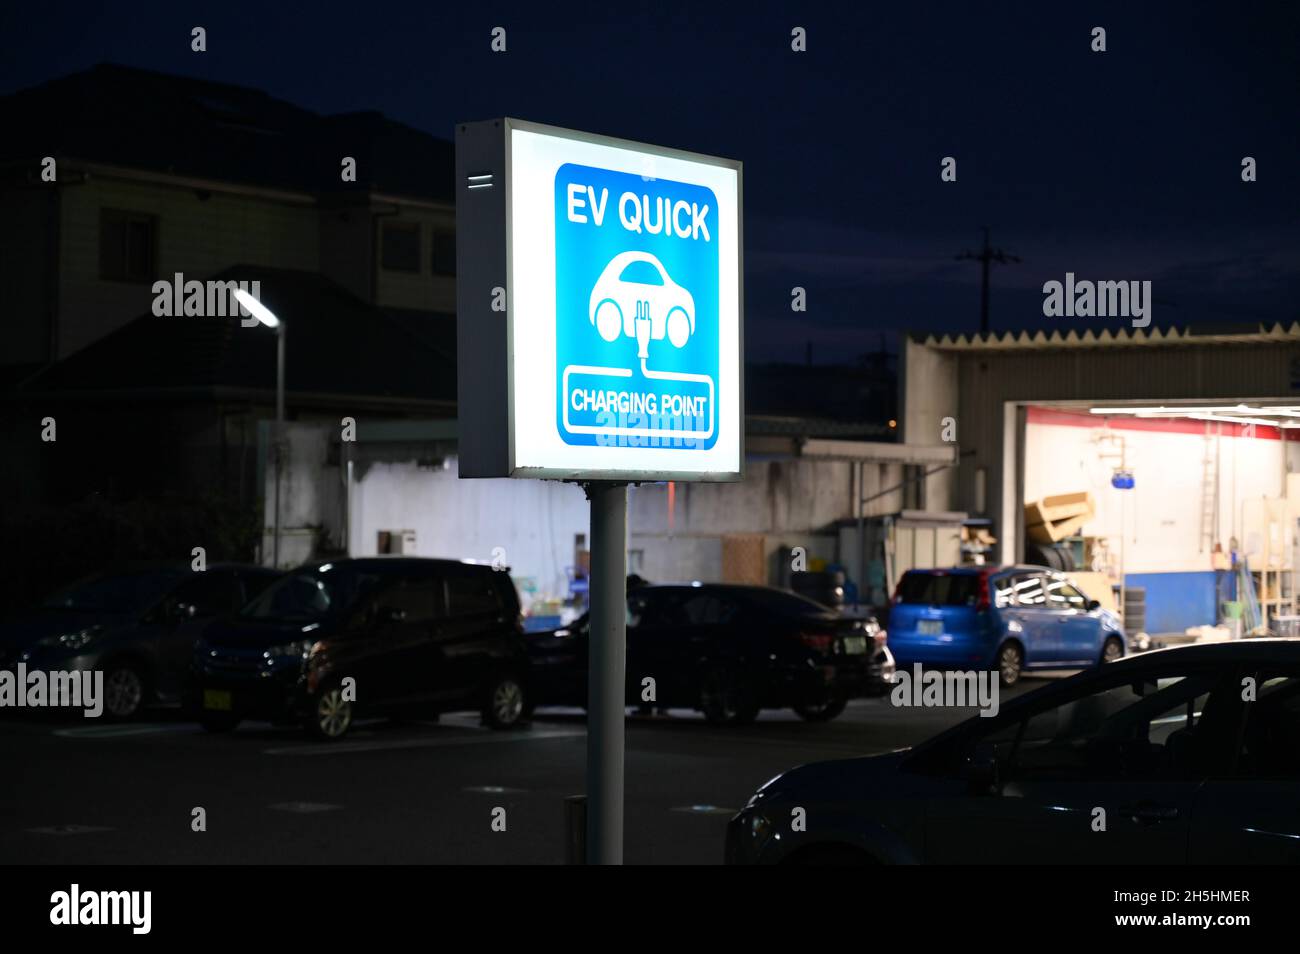 EV Quick charging point for electric vehicles. Blue light up sign. Repair shop in the background. Stock Photo